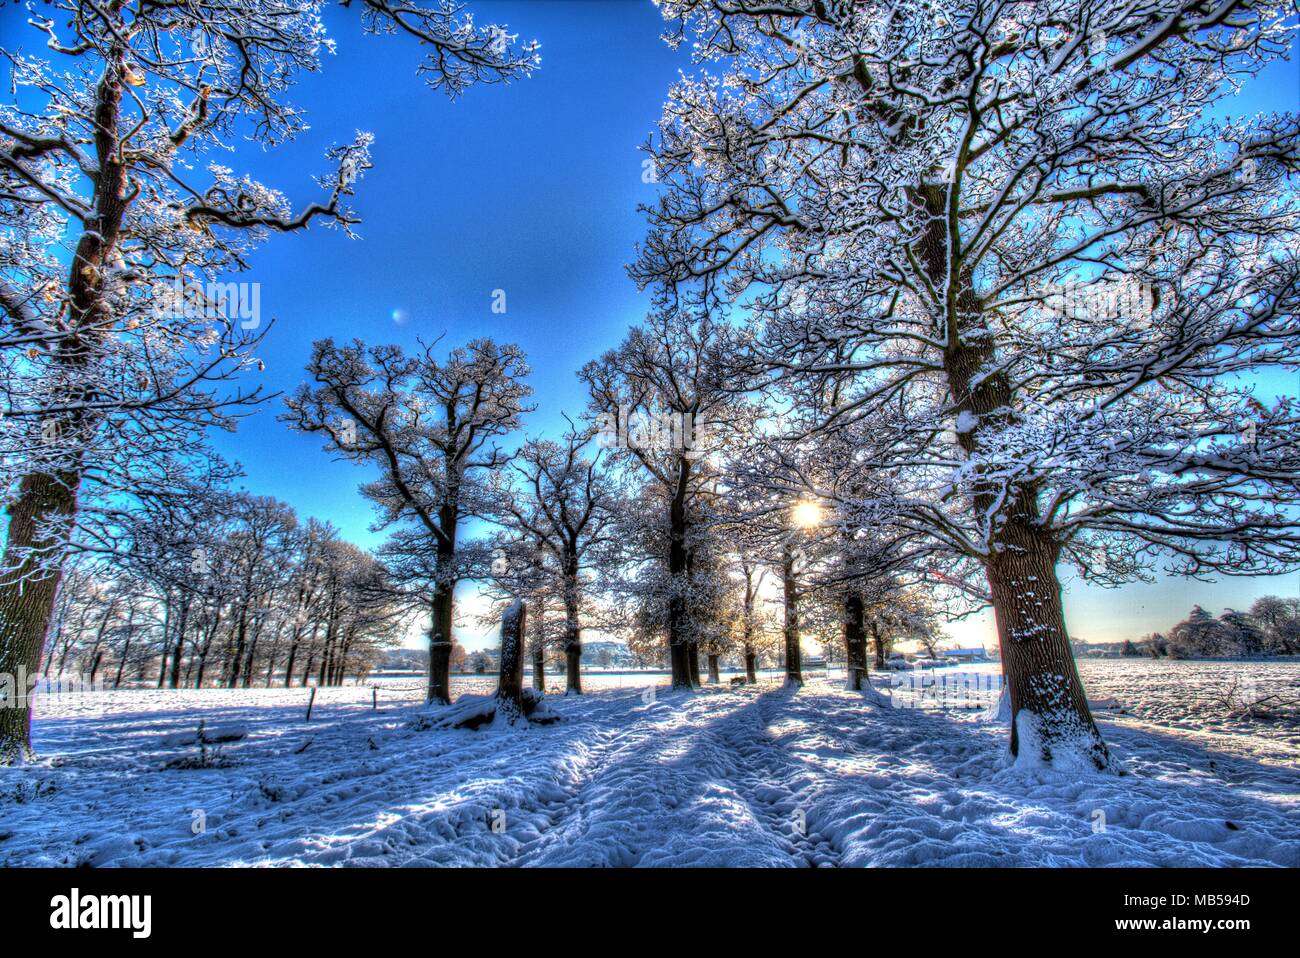 Village of Coddington, England. Artistic winter view of trees in a wooded area of a rural farm, in the Cheshire village of Coddington. Stock Photo